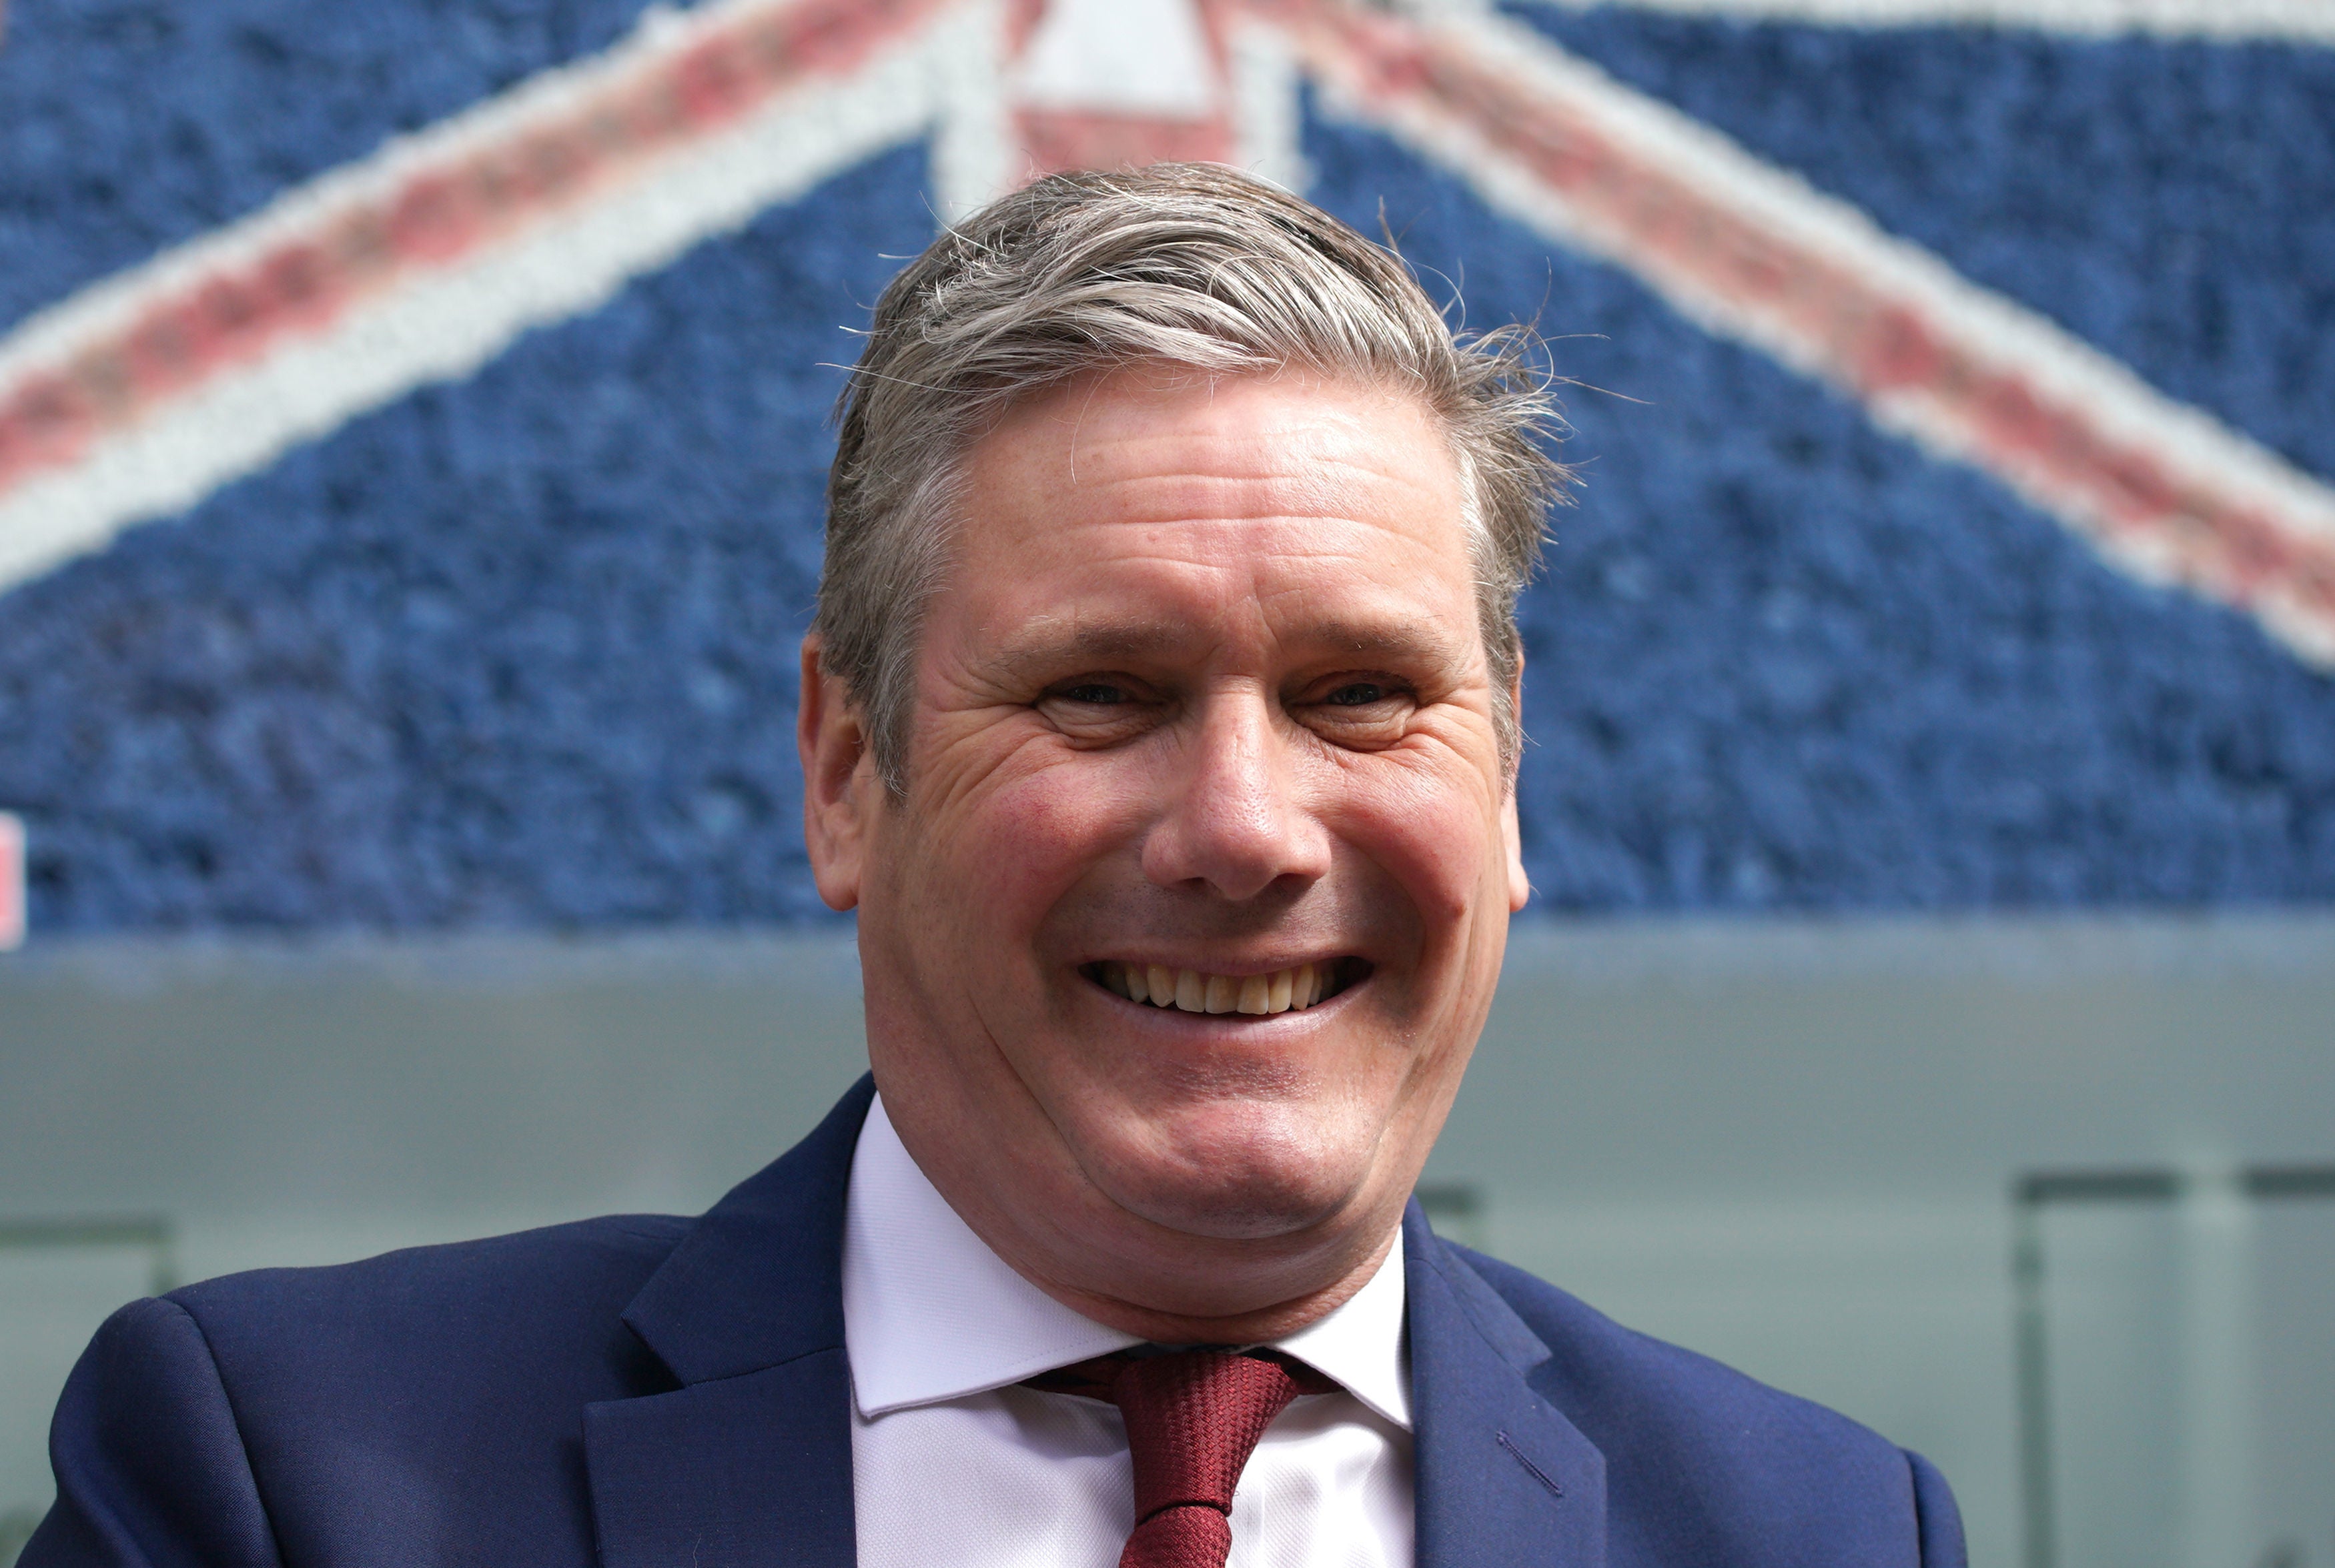 Keir Starmer has banned frontbenchers from attending